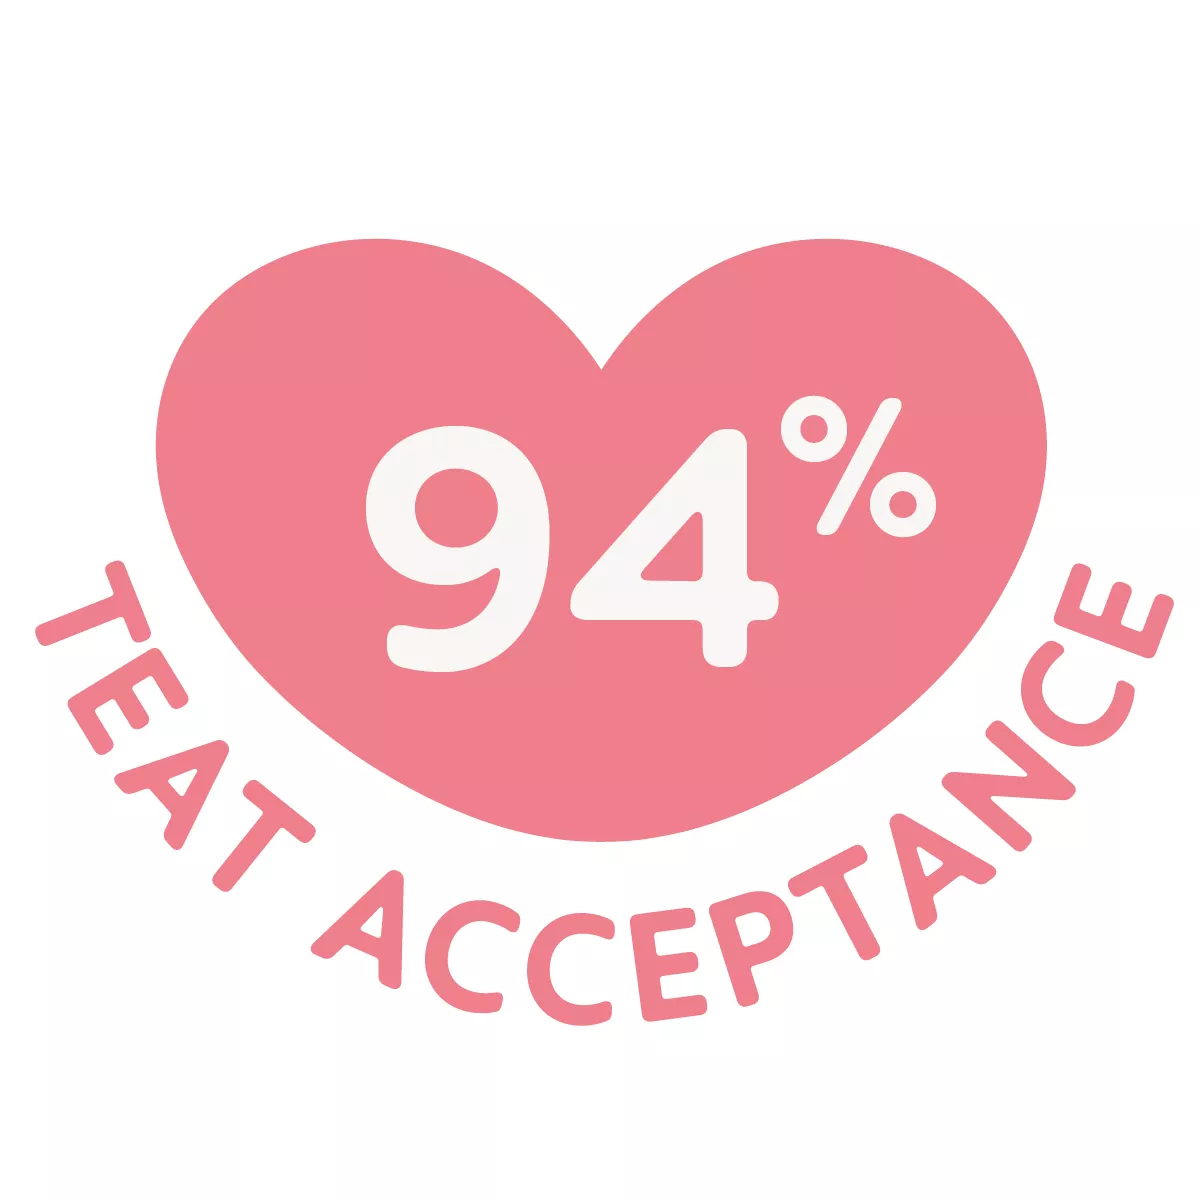 94% teat acceptance: easily accepted by babies, for a familiar feeling